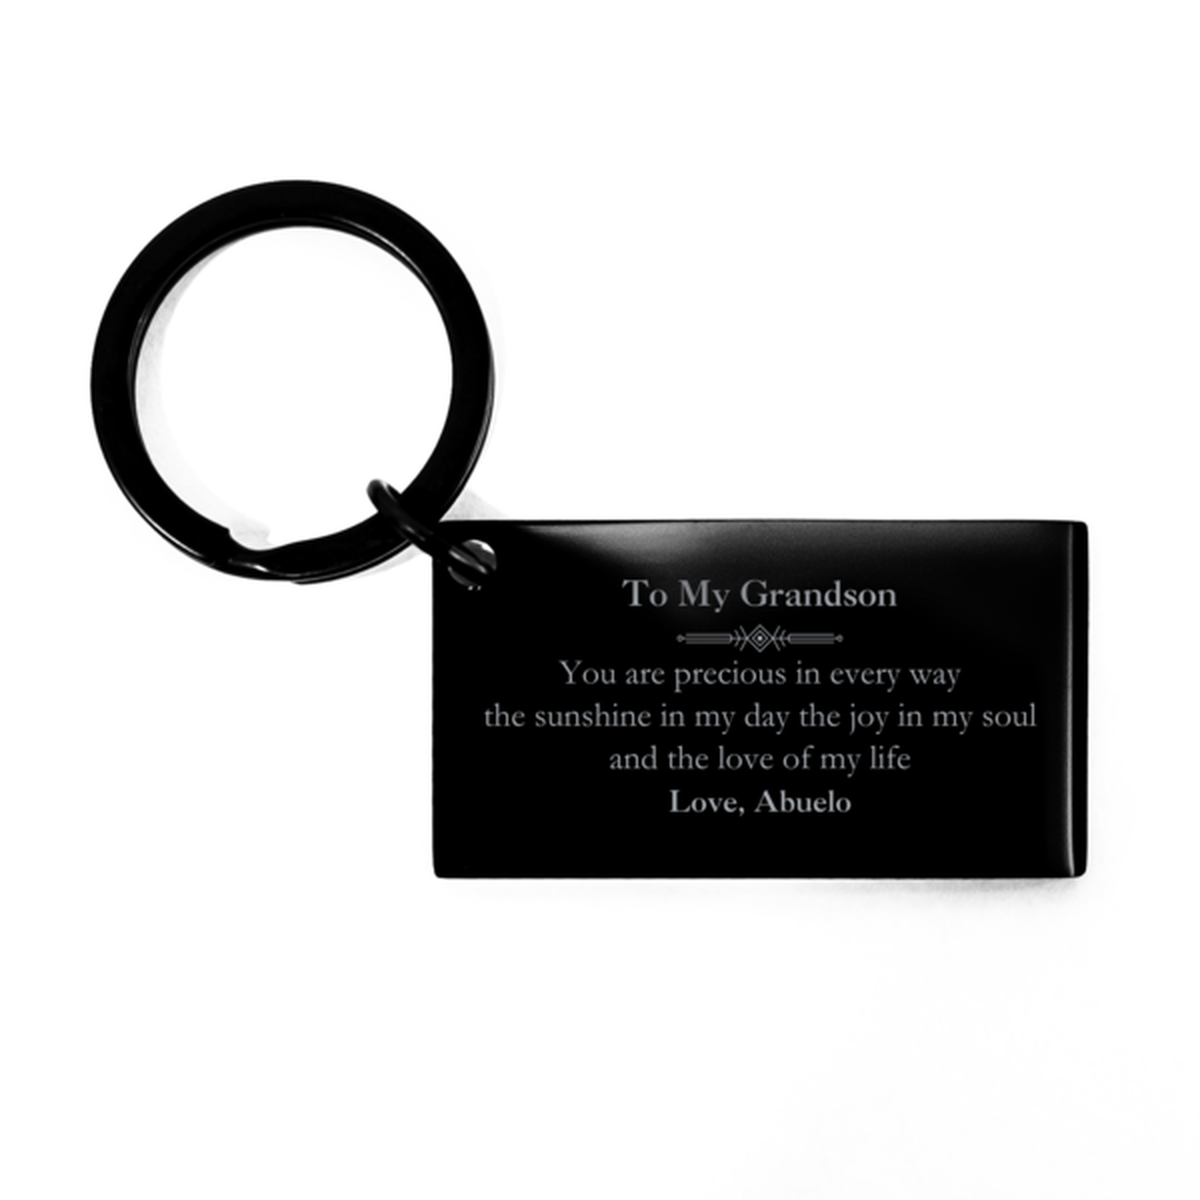 Graduation Gifts for Grandson Keychain Present from Abuelo, Christmas Grandson Birthday Gifts Grandson You are precious in every way the sunshine in my day. Love, Abuelo